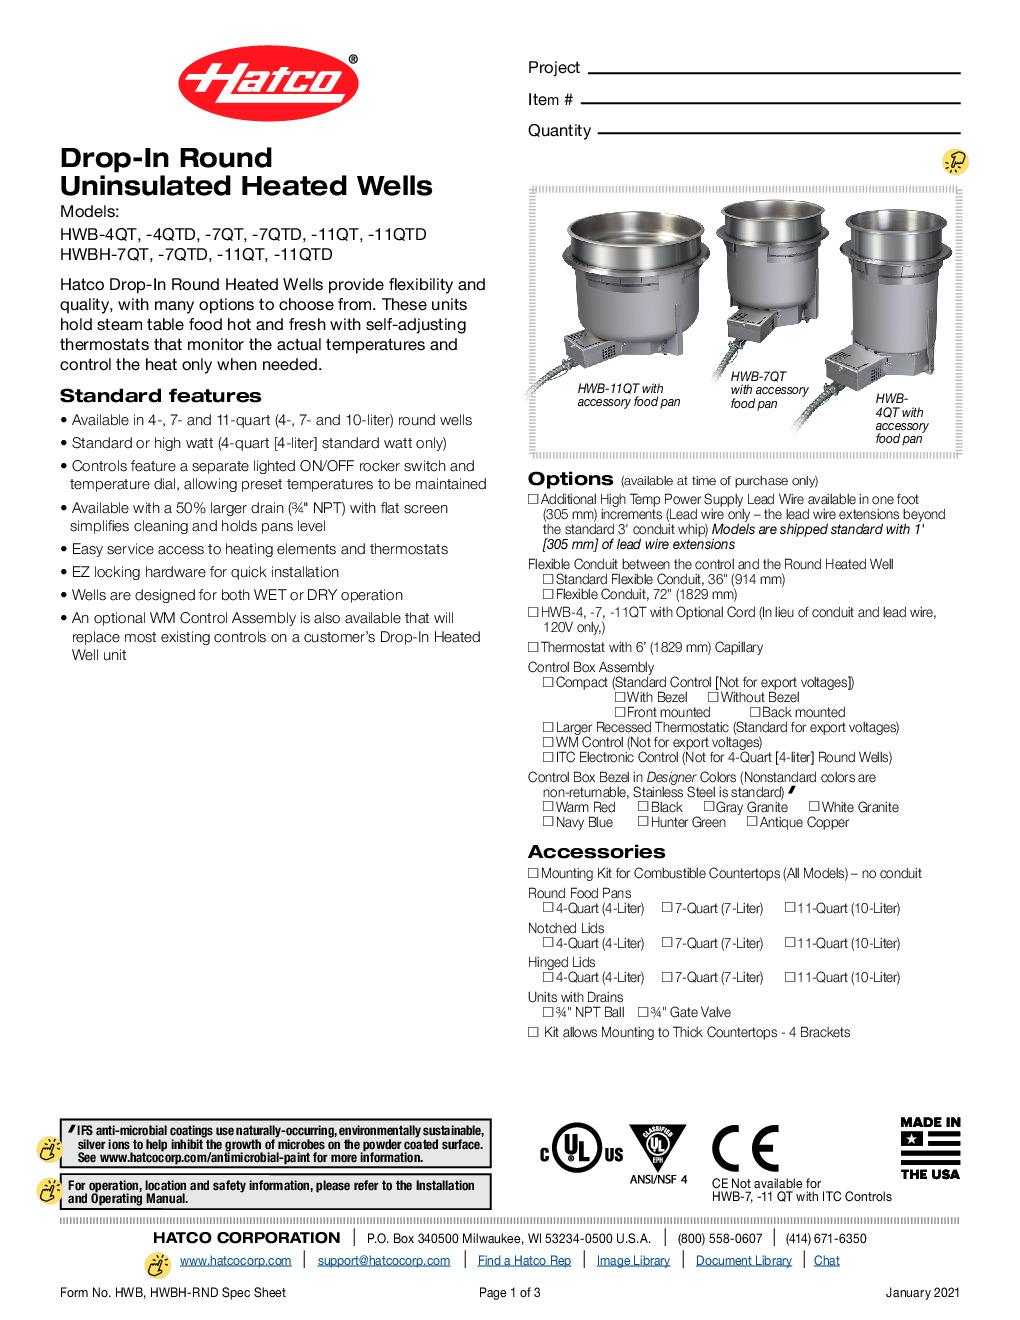 Hatco HWB/RT-4QTD Drop-In Round Uninsulated Heated Wells, With Drain